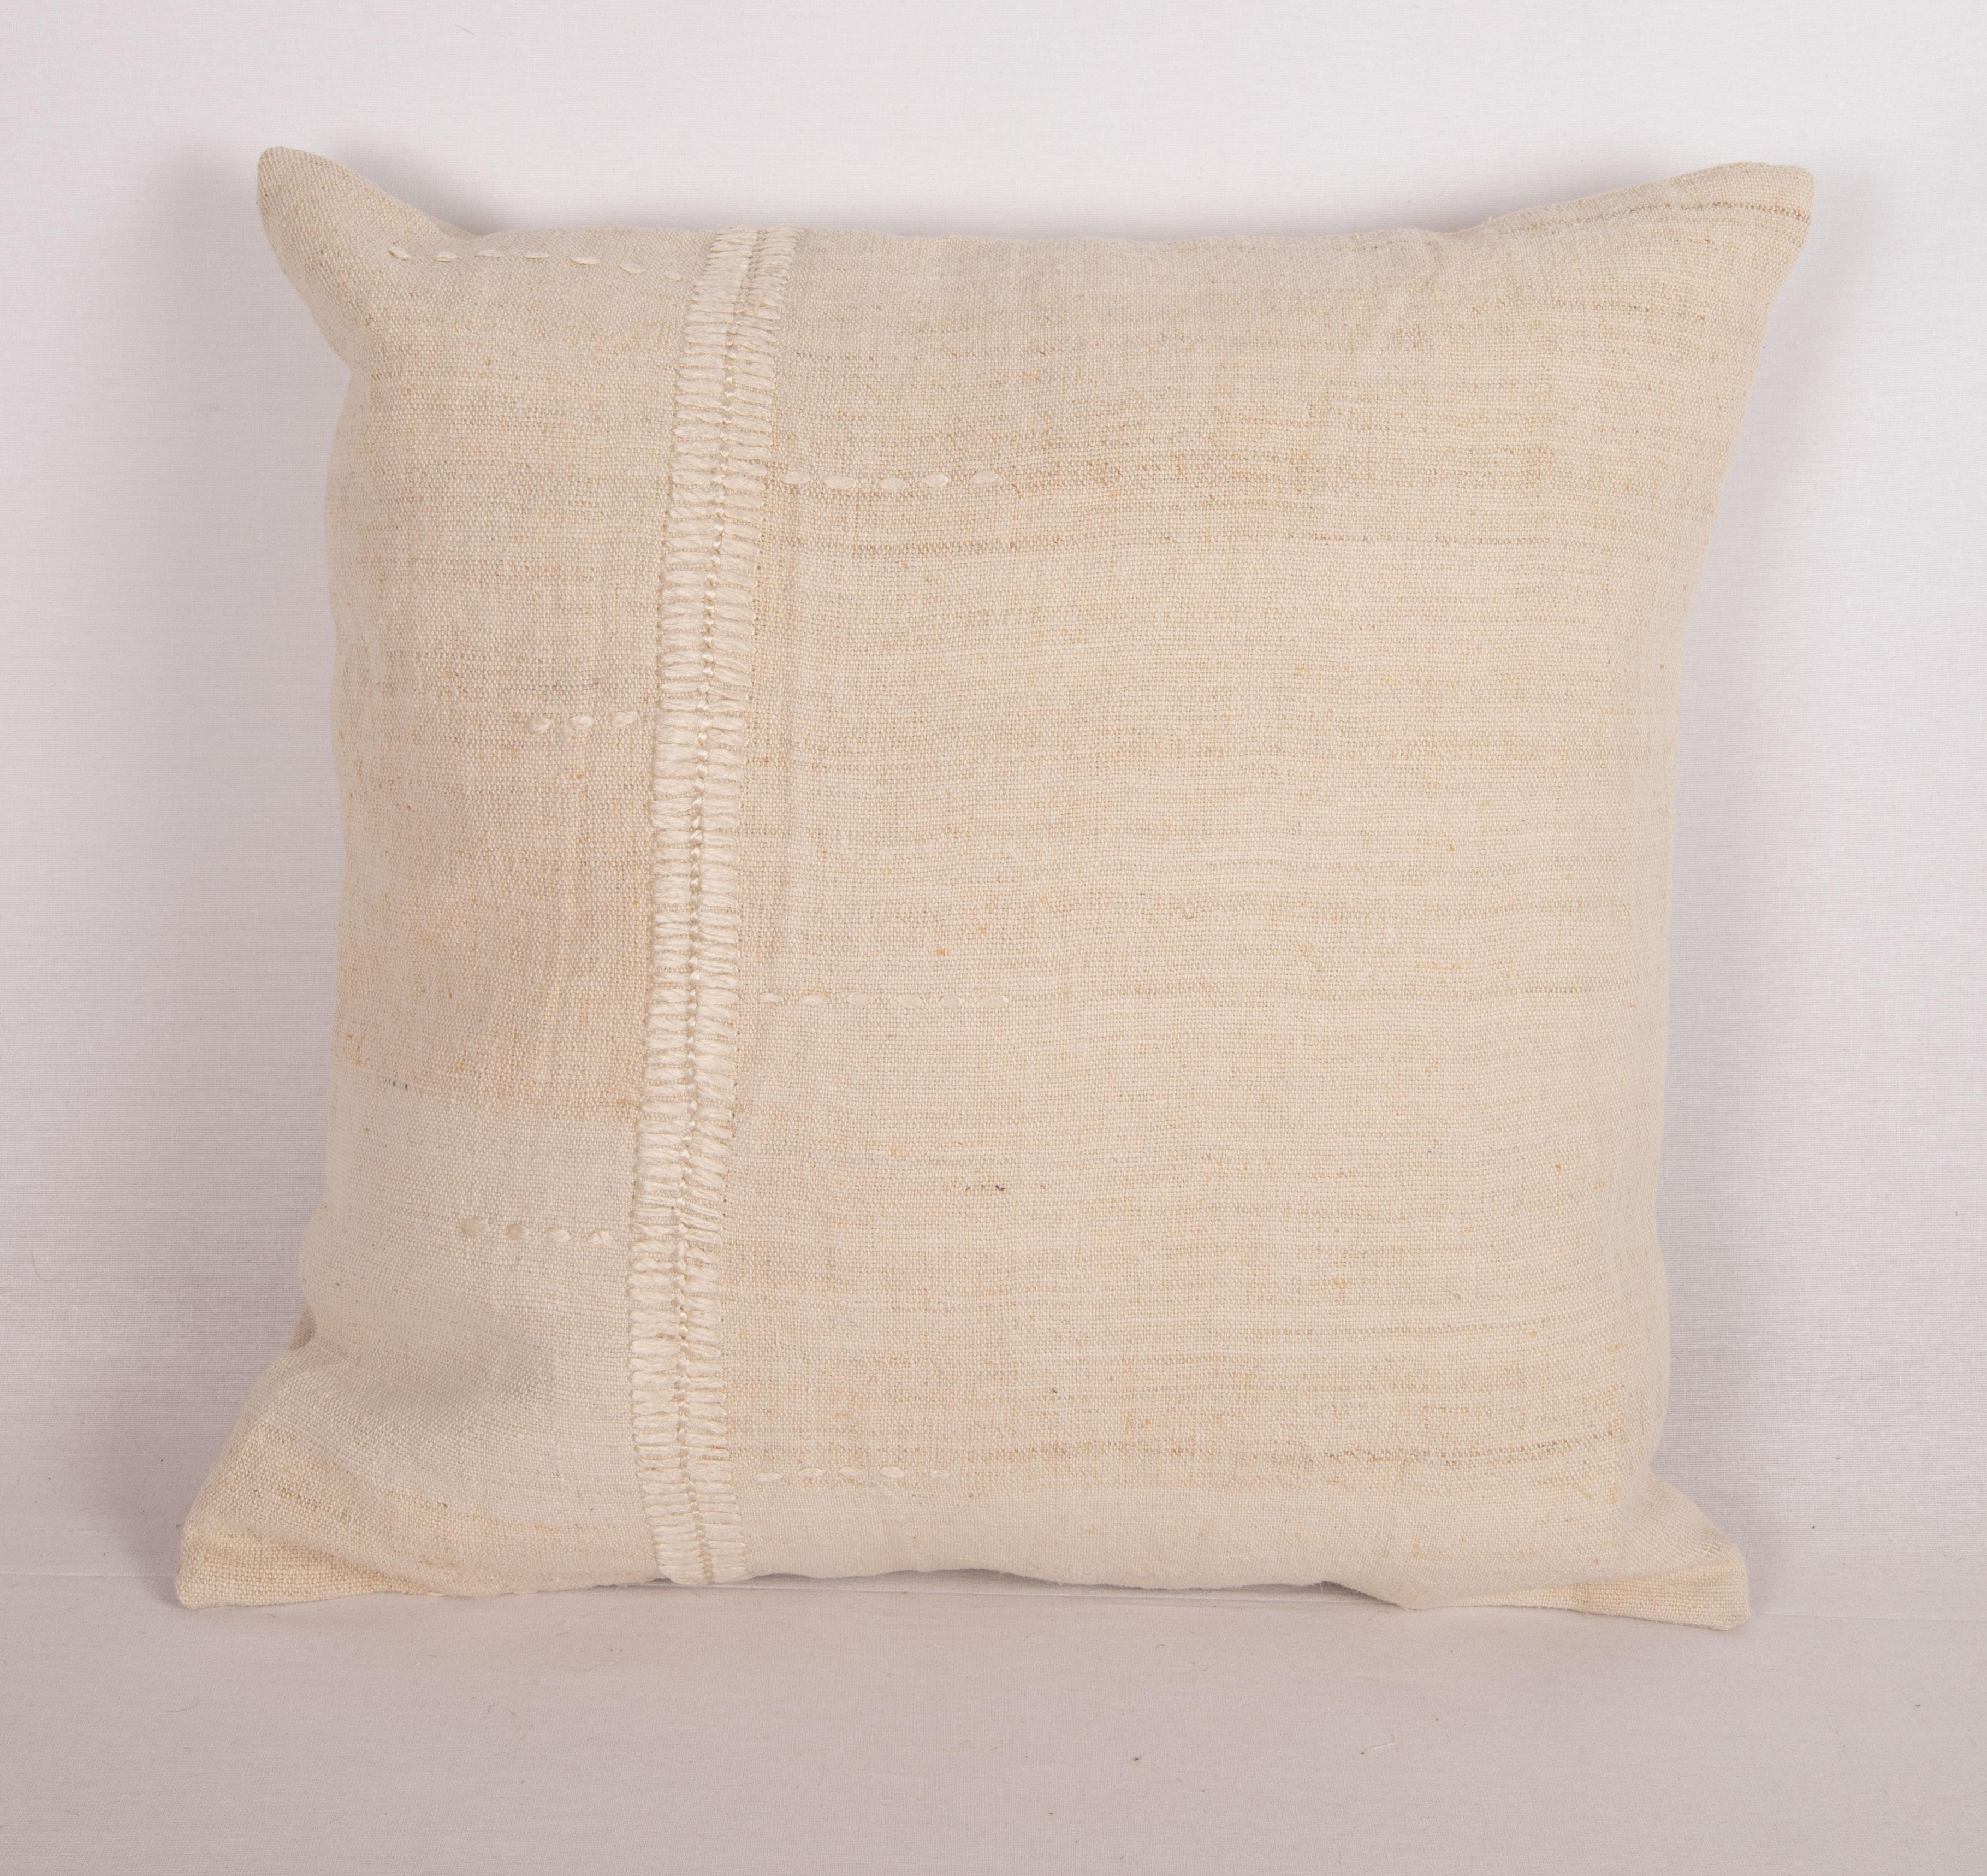 Rustic Pillow Case Made from a Vintage Anatolian Linen Fabric Mid 20th C. For Sale 1